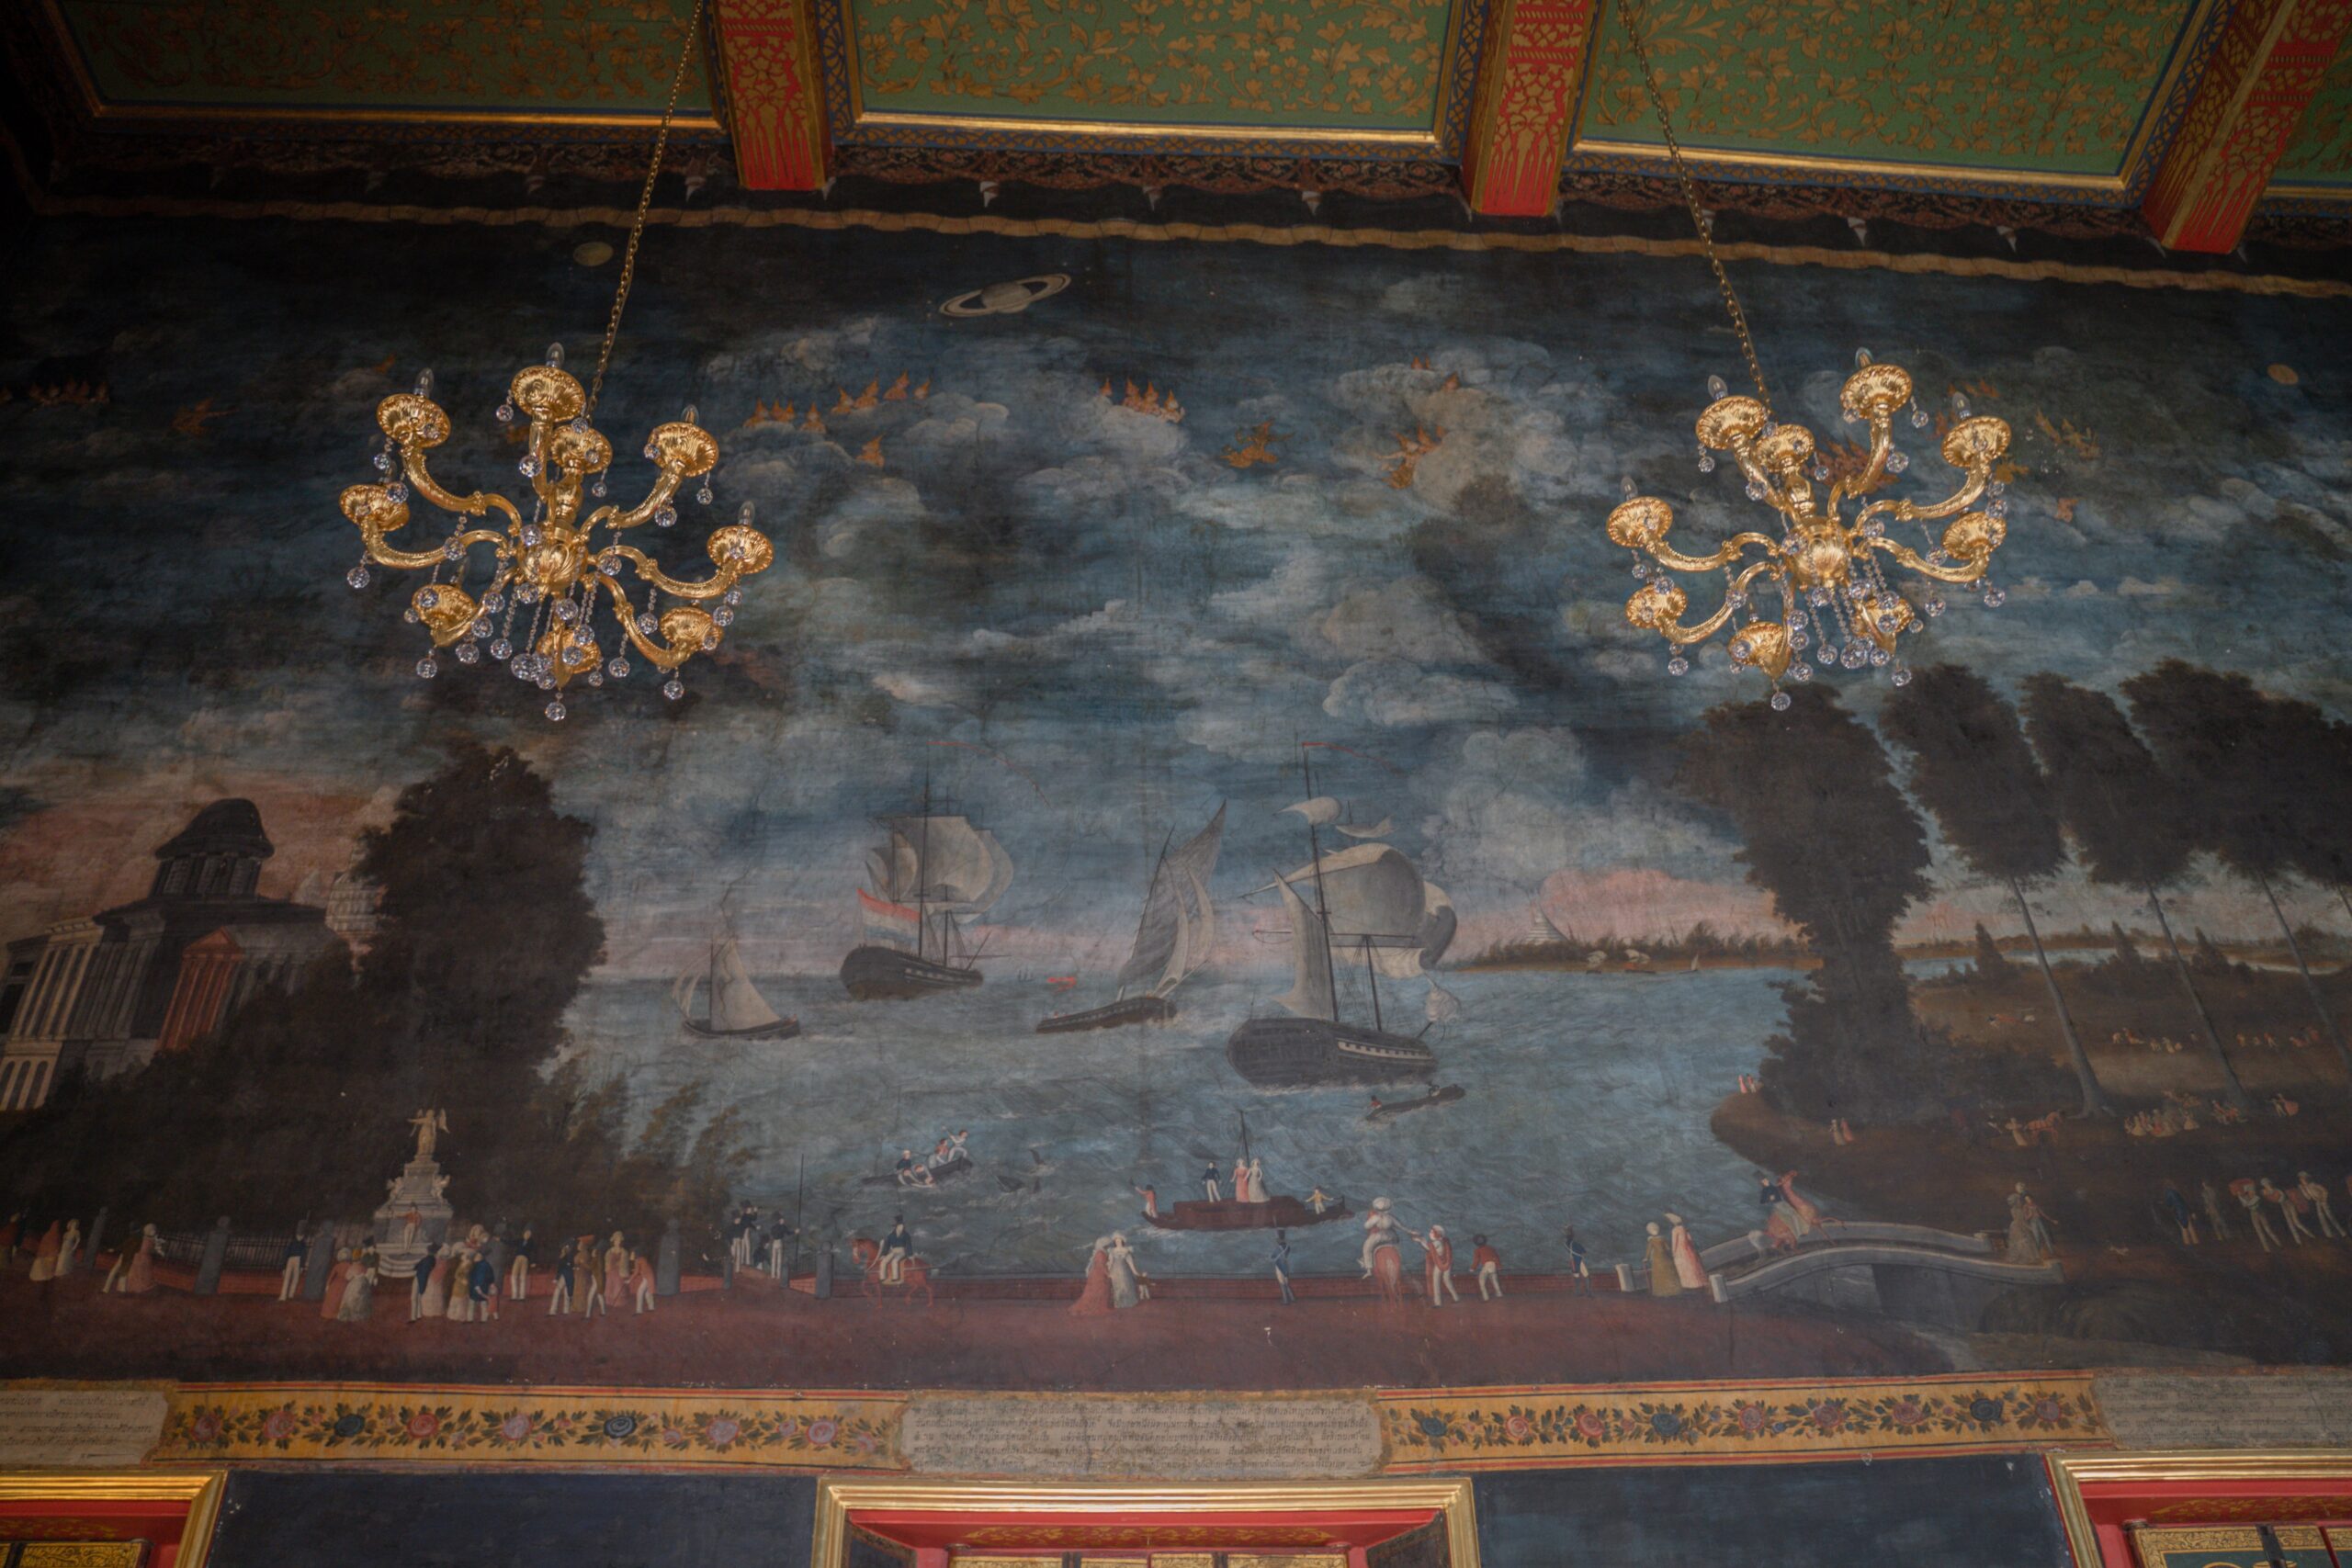 "For example, in one part of the mural, the perspectival technique of a vanishing point on the horizon is used as a metaphor for the destination of nirvana. The ocean then becomes an obstacle to be surmounted, but there is a wise man who builds a ship to help carry all humans across the ocean to reach nirvana."